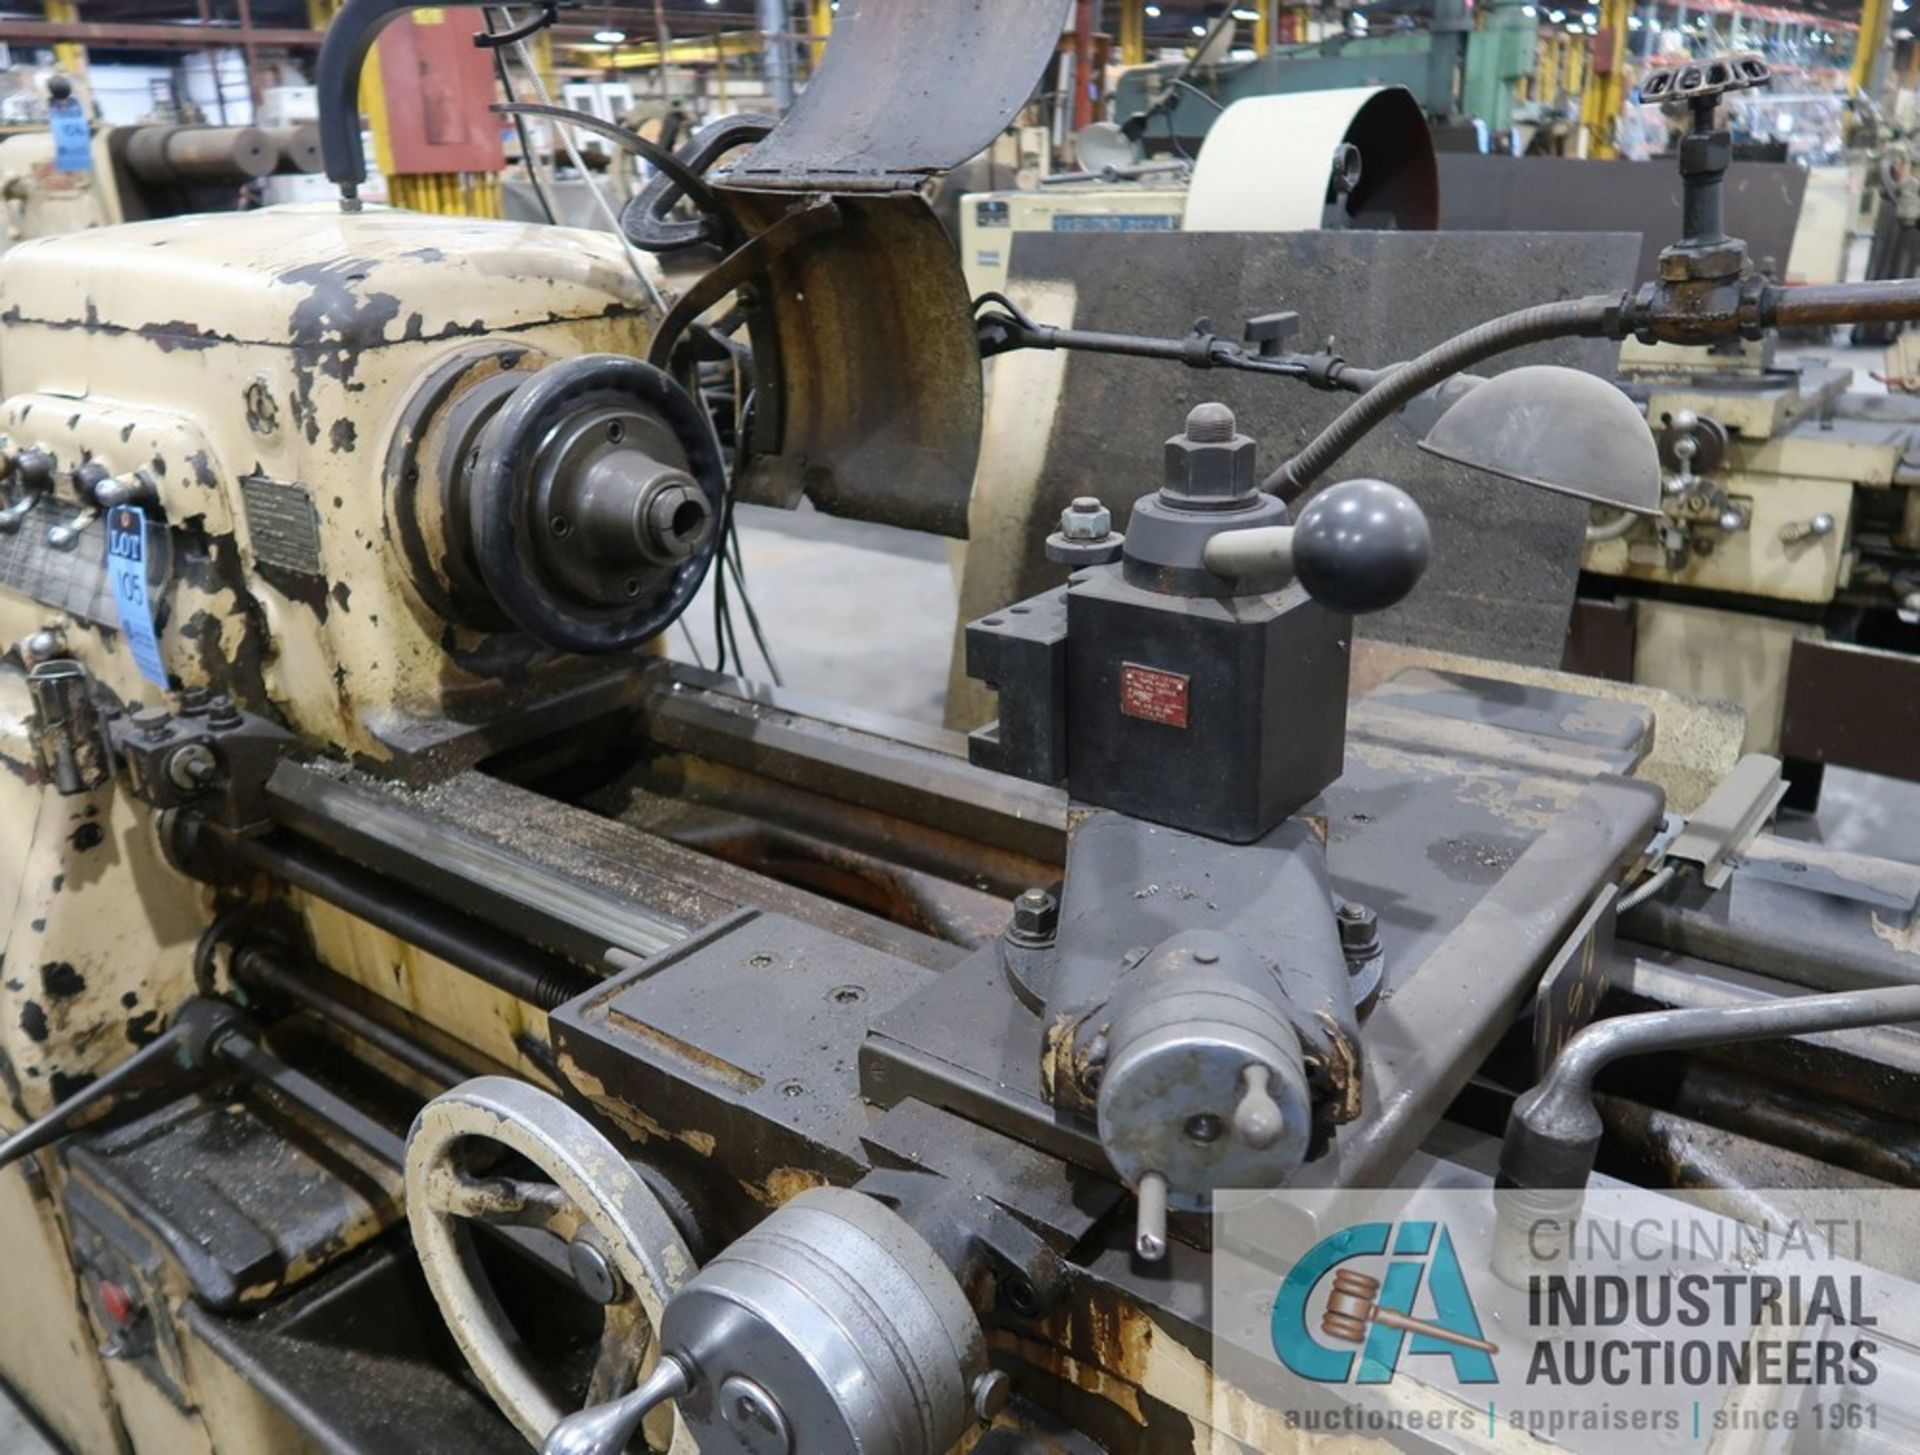 18" X 54" MONARCH GEARED HEAD ENGINE LATHE WITH TAPER S/N 31154, HARDINGE NO. 3 SPEED COLLET CHUCK - Image 4 of 7